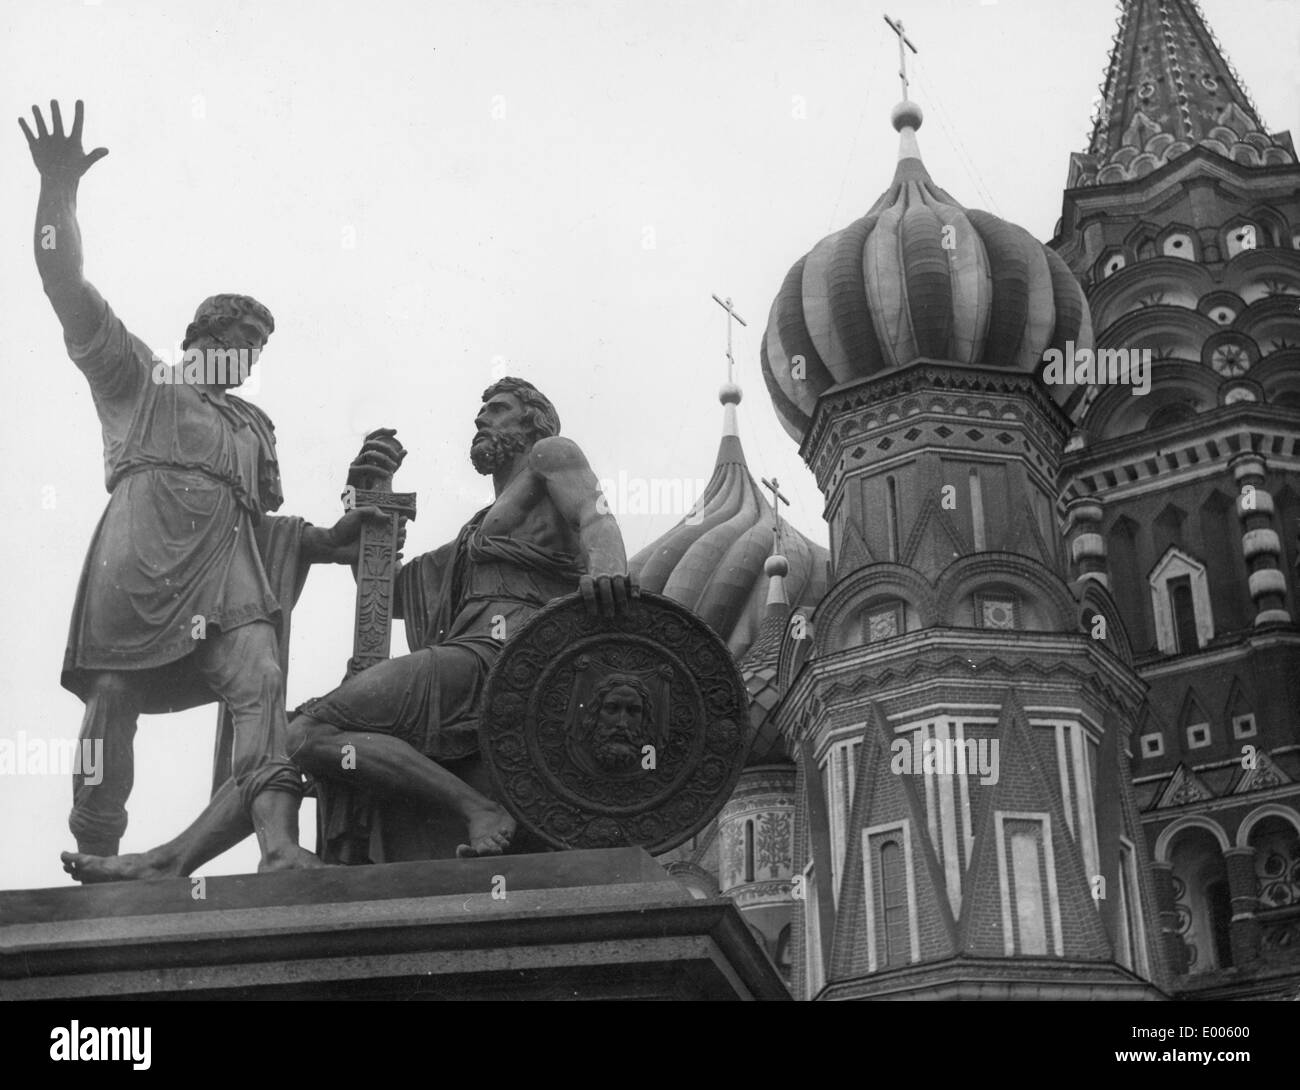 Minin and Pozharsky in front of the St. Basil's Cathedral, 1950's Stock Photo